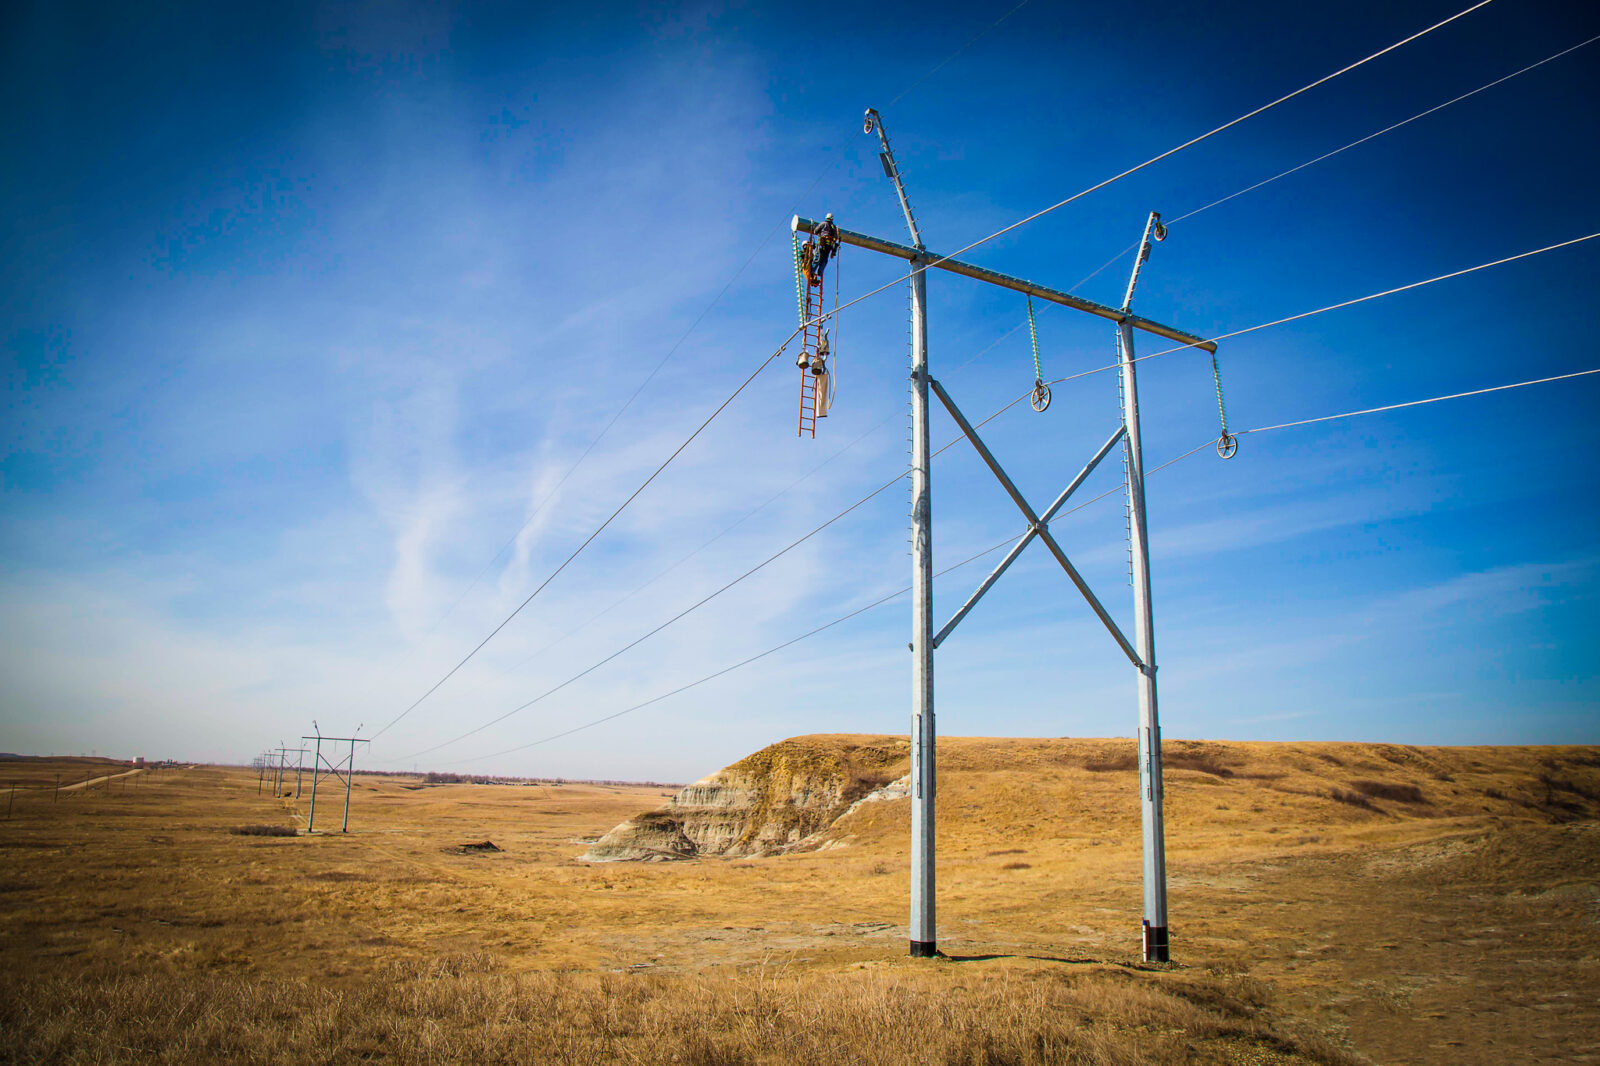 Two people working on the judson transmission towers